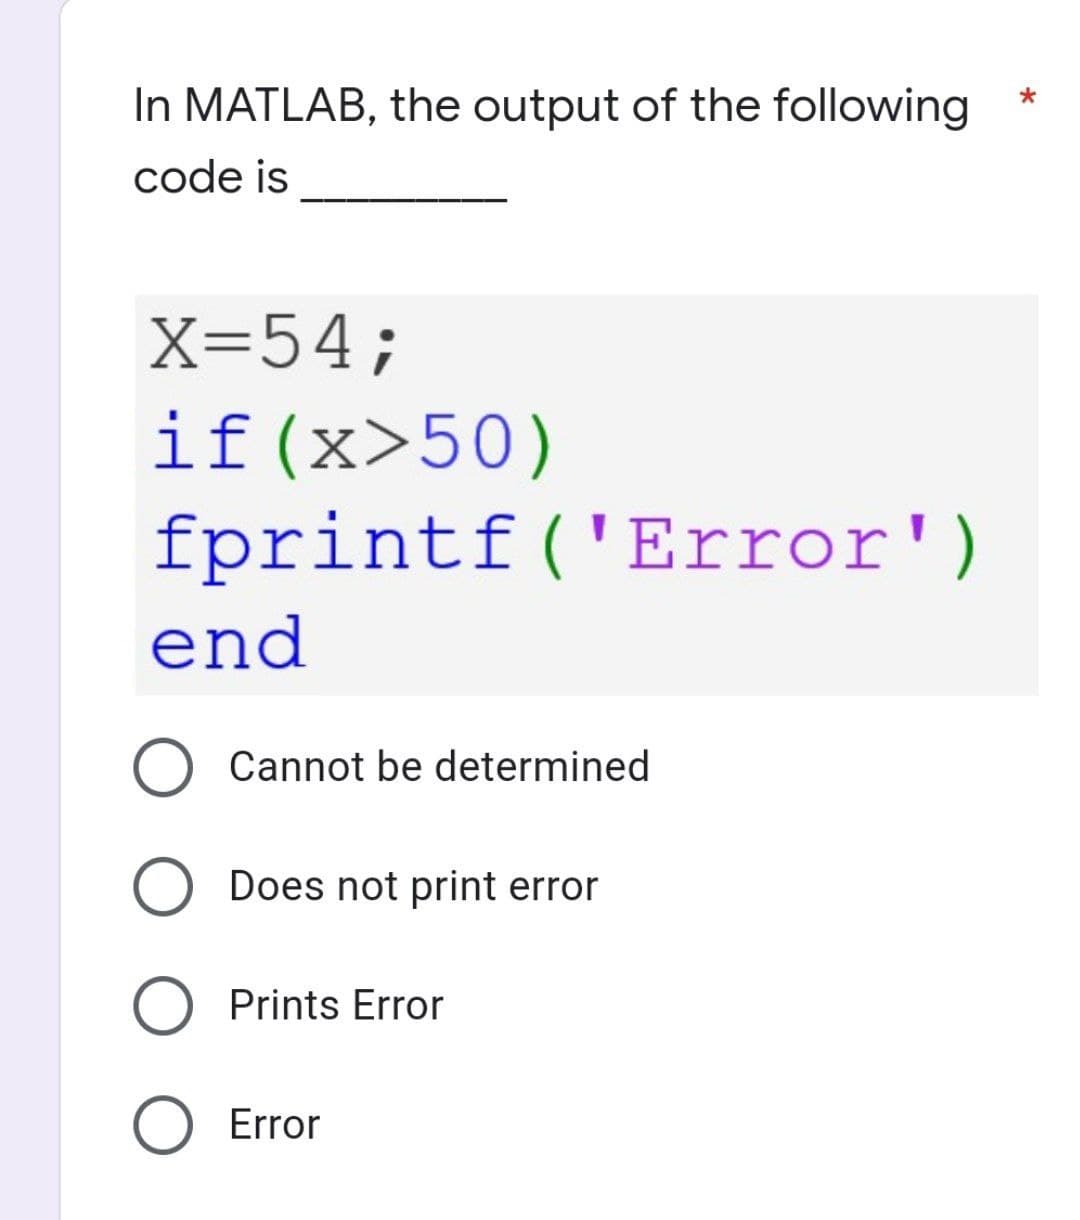 In MATLAB, the output of the following
code is
X=54;
if (x>50)
fprintf('Error')
end
O Cannot be determined
O Does not print error
O Prints Error
O Error
*